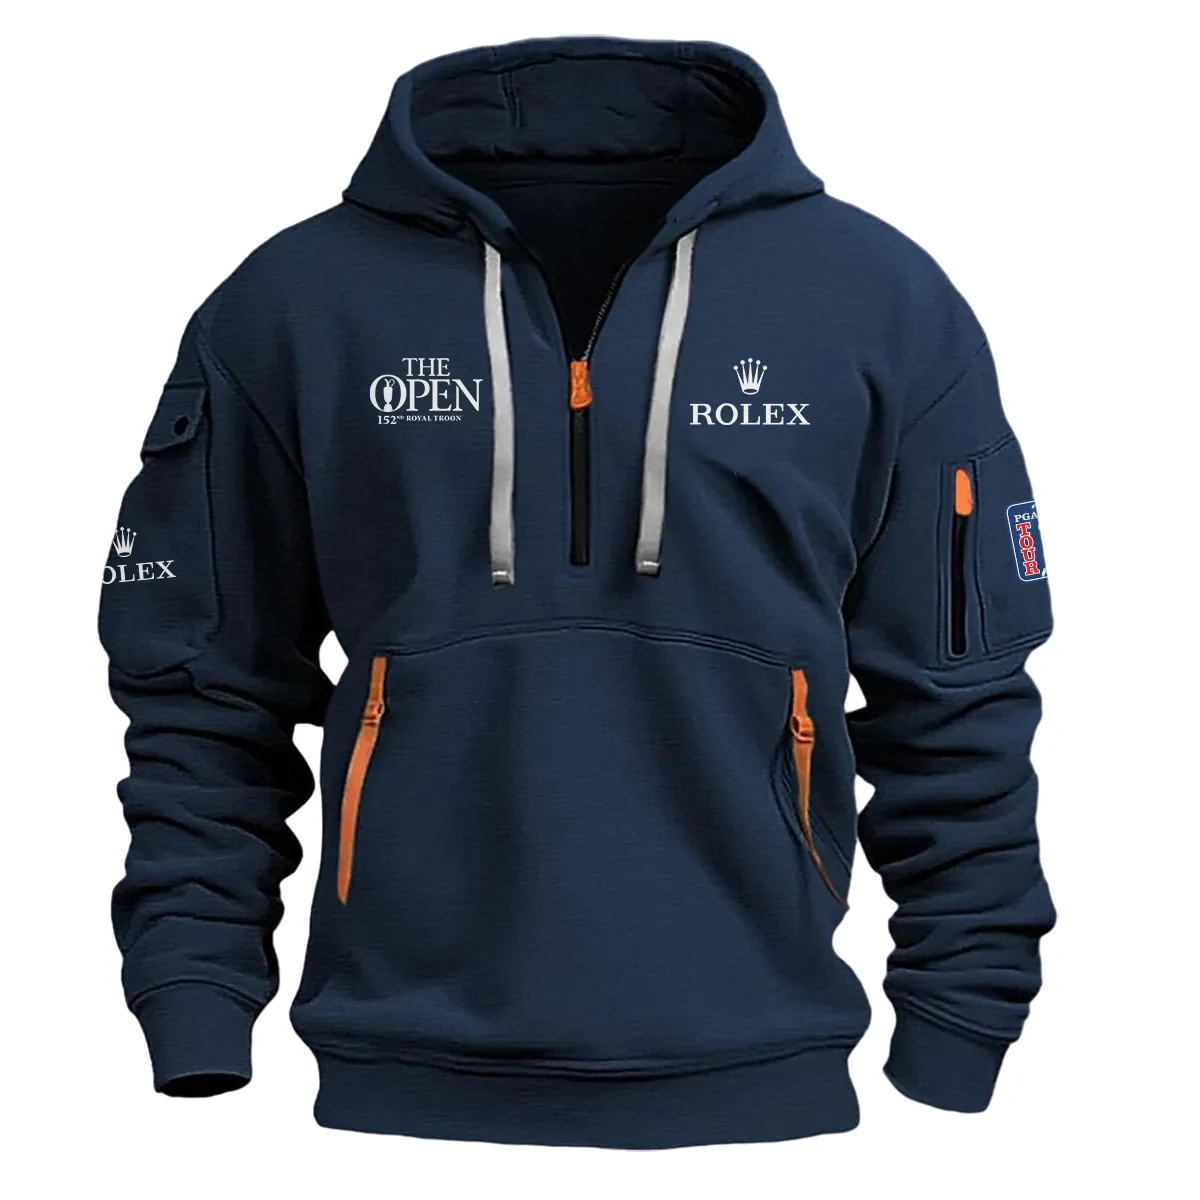 Navy Color Rolex Fashion Hoodie Half Zipper 152nd The Open Championship Gift For Fans